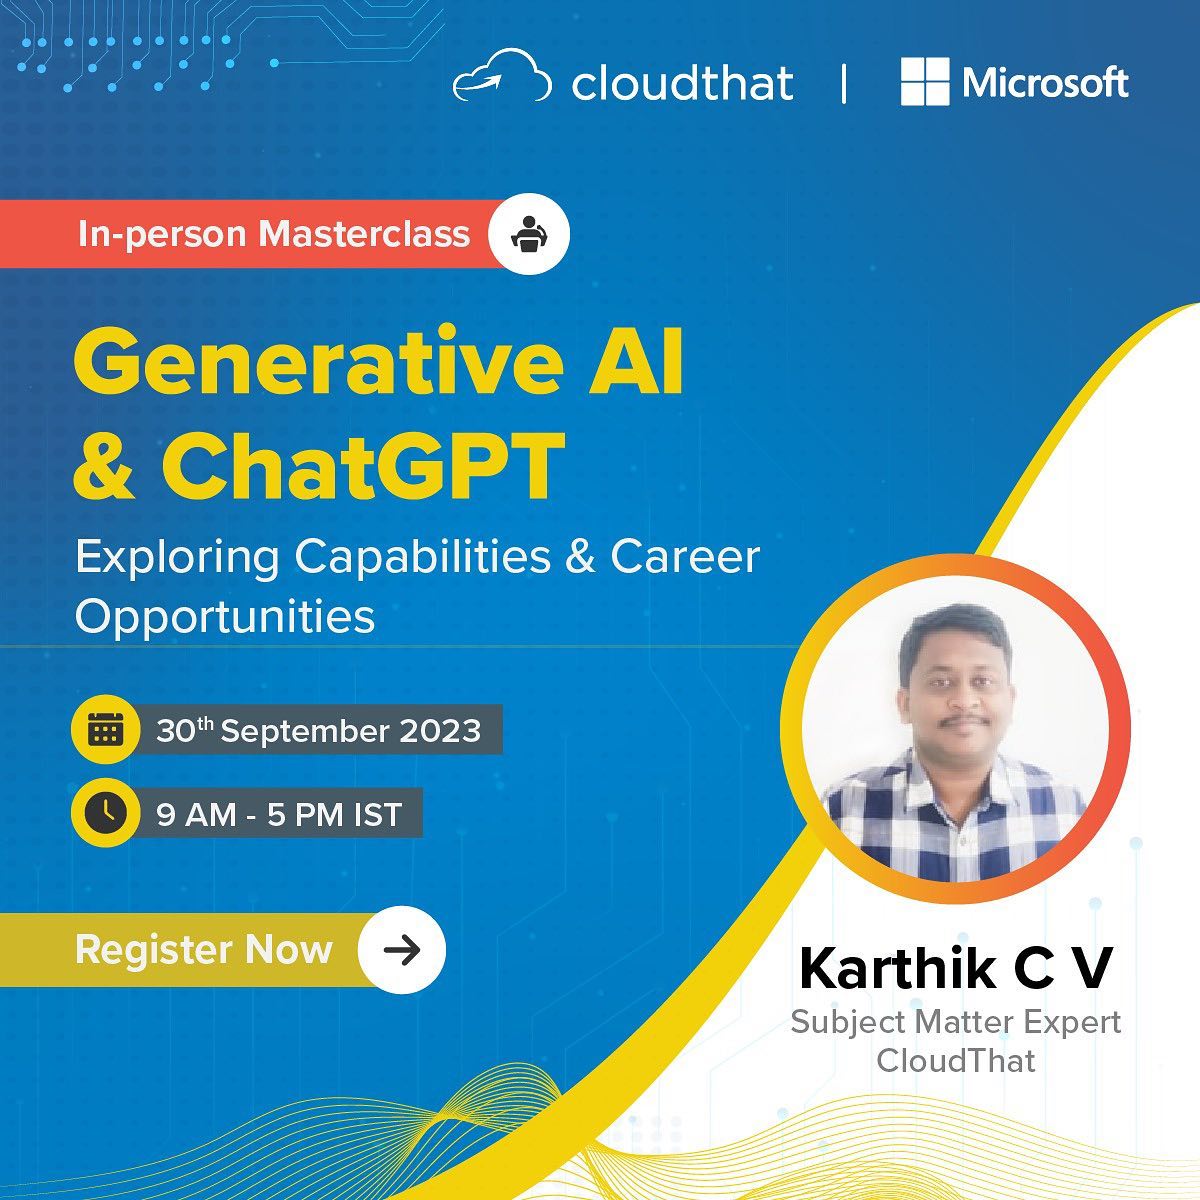 Join our in-person Masterclass where you will learn about Generative AI and ChatGPT. You'll also get to explore different career possibilities in this field with our Subject Matter Expert, Karthik C V.

By the end of the session, you will:

1. Learn the fundamentals of Generative AI.

2. Find out what ChatGPT can do in the world of generating human-like text.

3. See practical examples of how Generative AI and ChatGPT are used to solve complex problems.

4. Discover the various job opportunities available in Generative AI and natural language processing.
@Microsoft

#GenerativeAI #ChatGPT #Masterclass #AIeducation #CareerOpportunities #NaturalLanguageProcessing #AIWorkshop #TechTraining #AIInnovation #MachineLearning #CareerDevelopment #AIExperts #RealWorldExamples #AIJobs #TechEvent #LearnAI #AICommunity #FutureTech #AIExploration #AIInPersonEvent